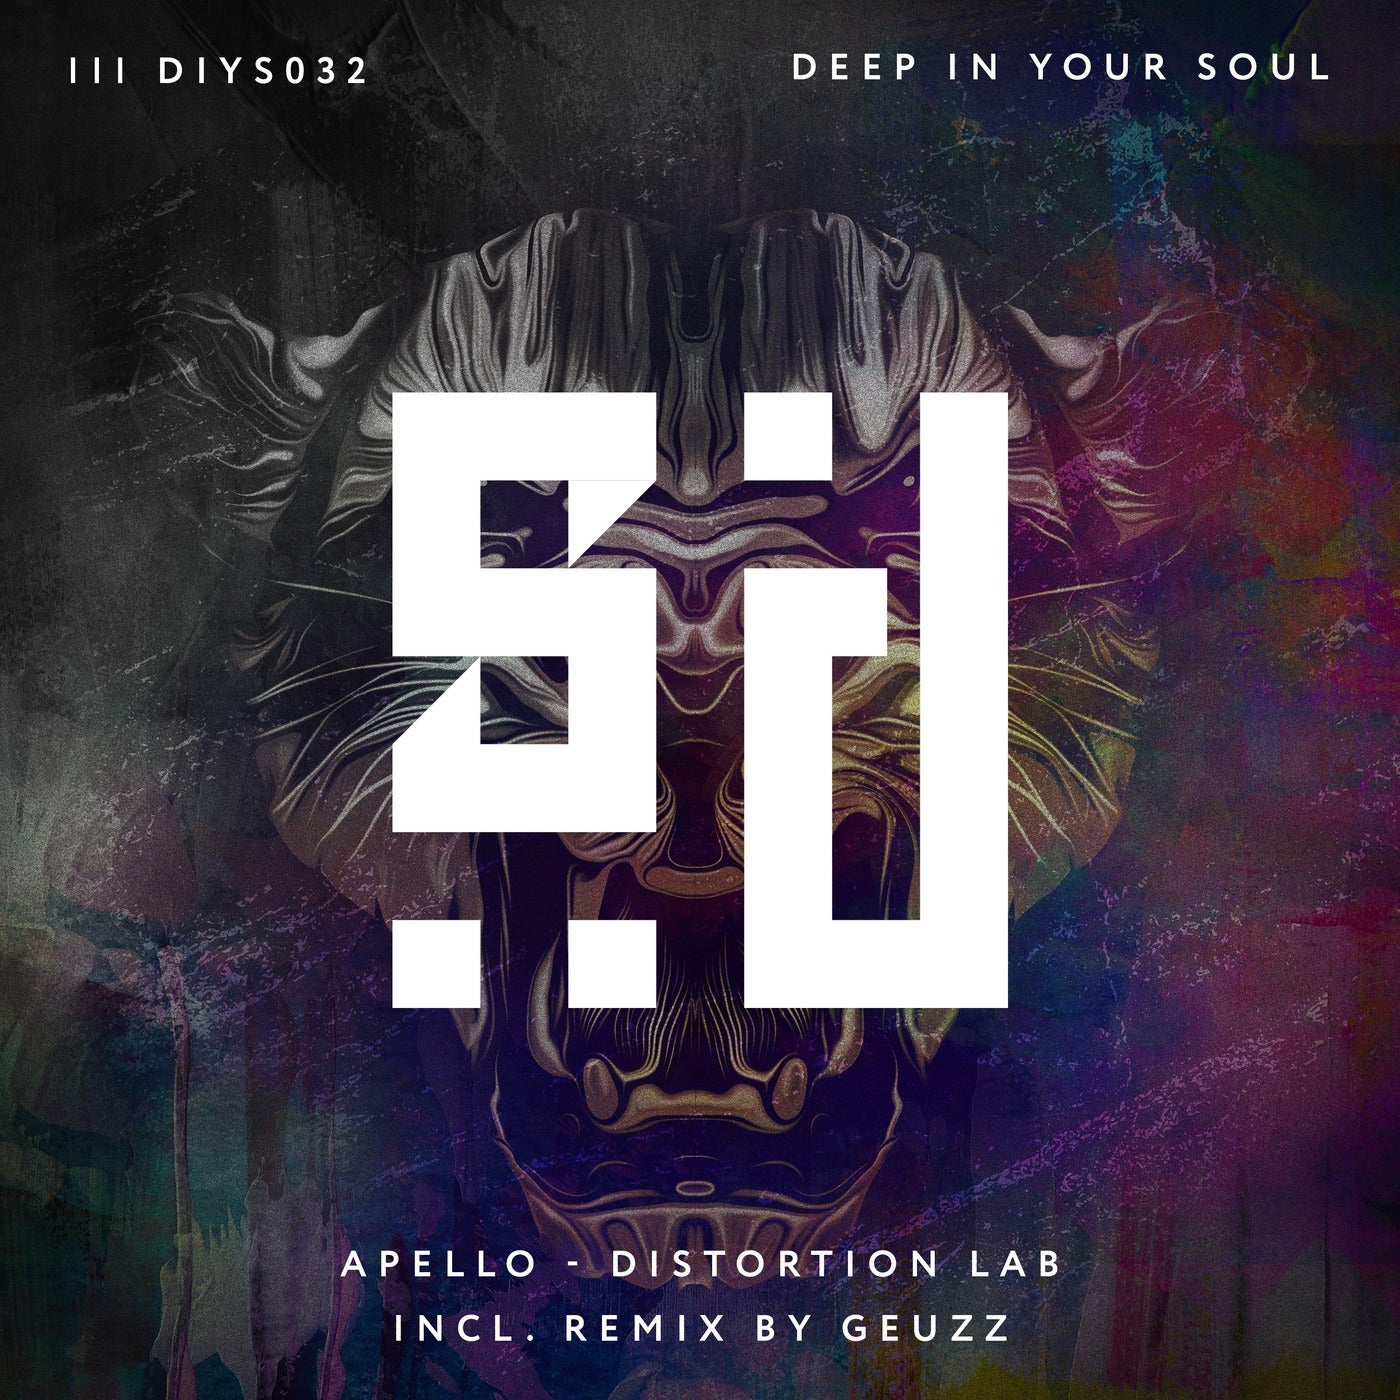 Apello - Distortion Lab on Deep In Your Soul